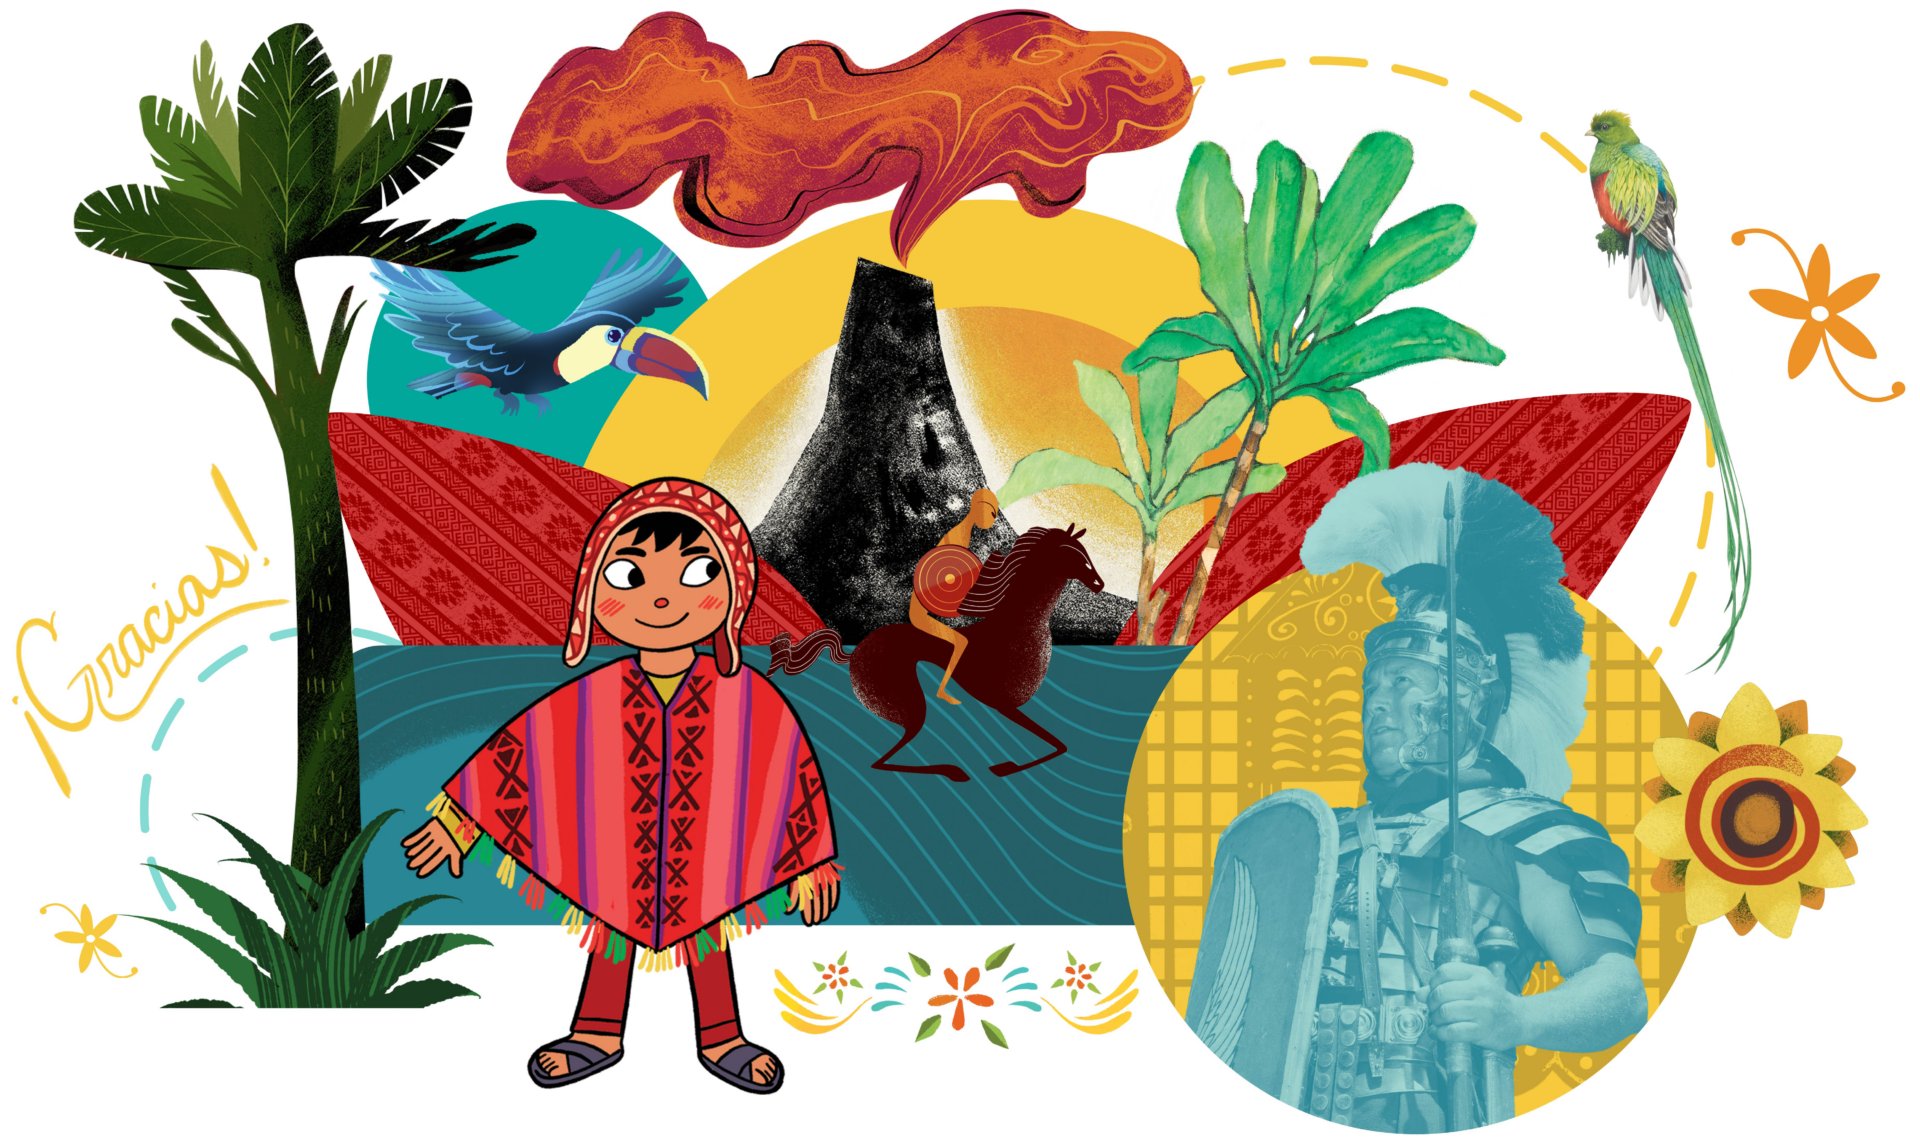 Colorful illustration depicting a tropical scene with a volcano, wildlife, and a child in traditional attire, surrounded by symbols of ancient civilization and nature.